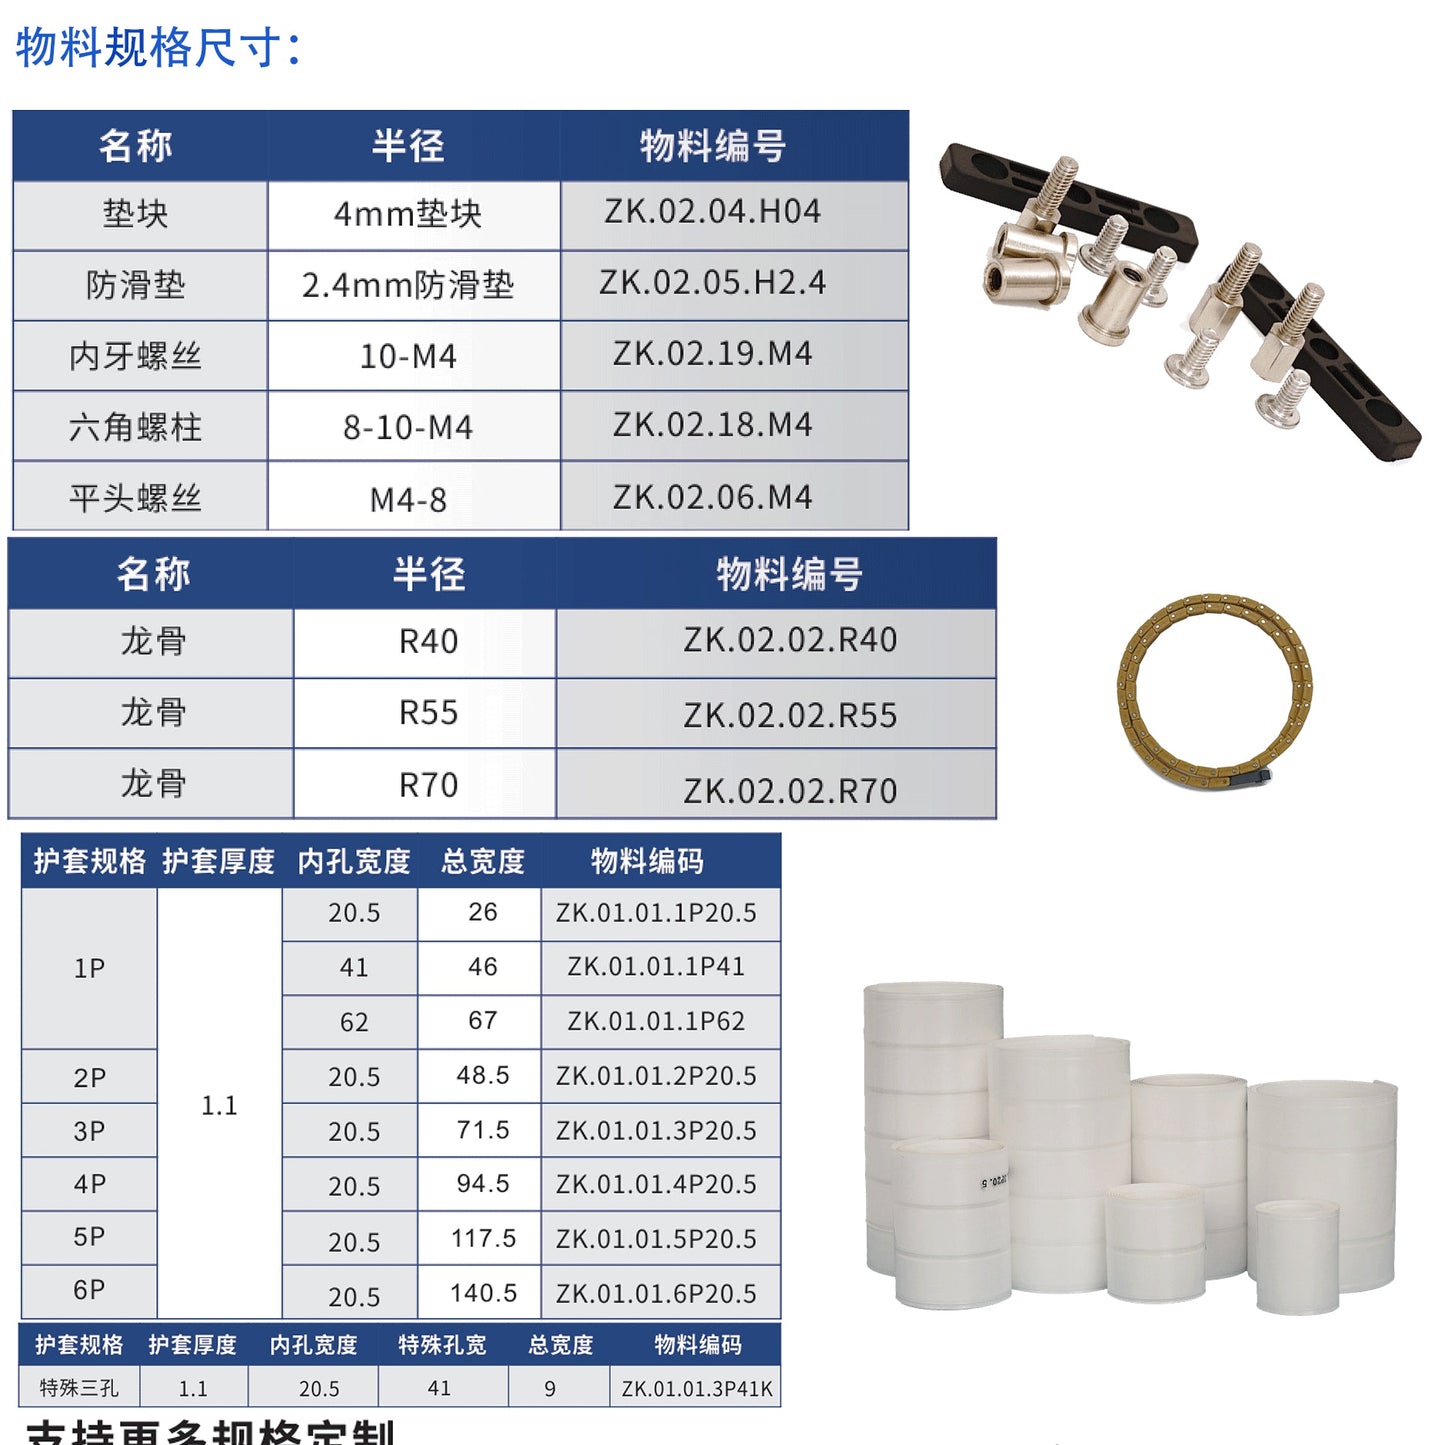 High quality flexibility dust-free drag chain, clean room dust free towline - Premium dust-free drag chain from GuangRou - Source Manufacturer, Customized Solutions.